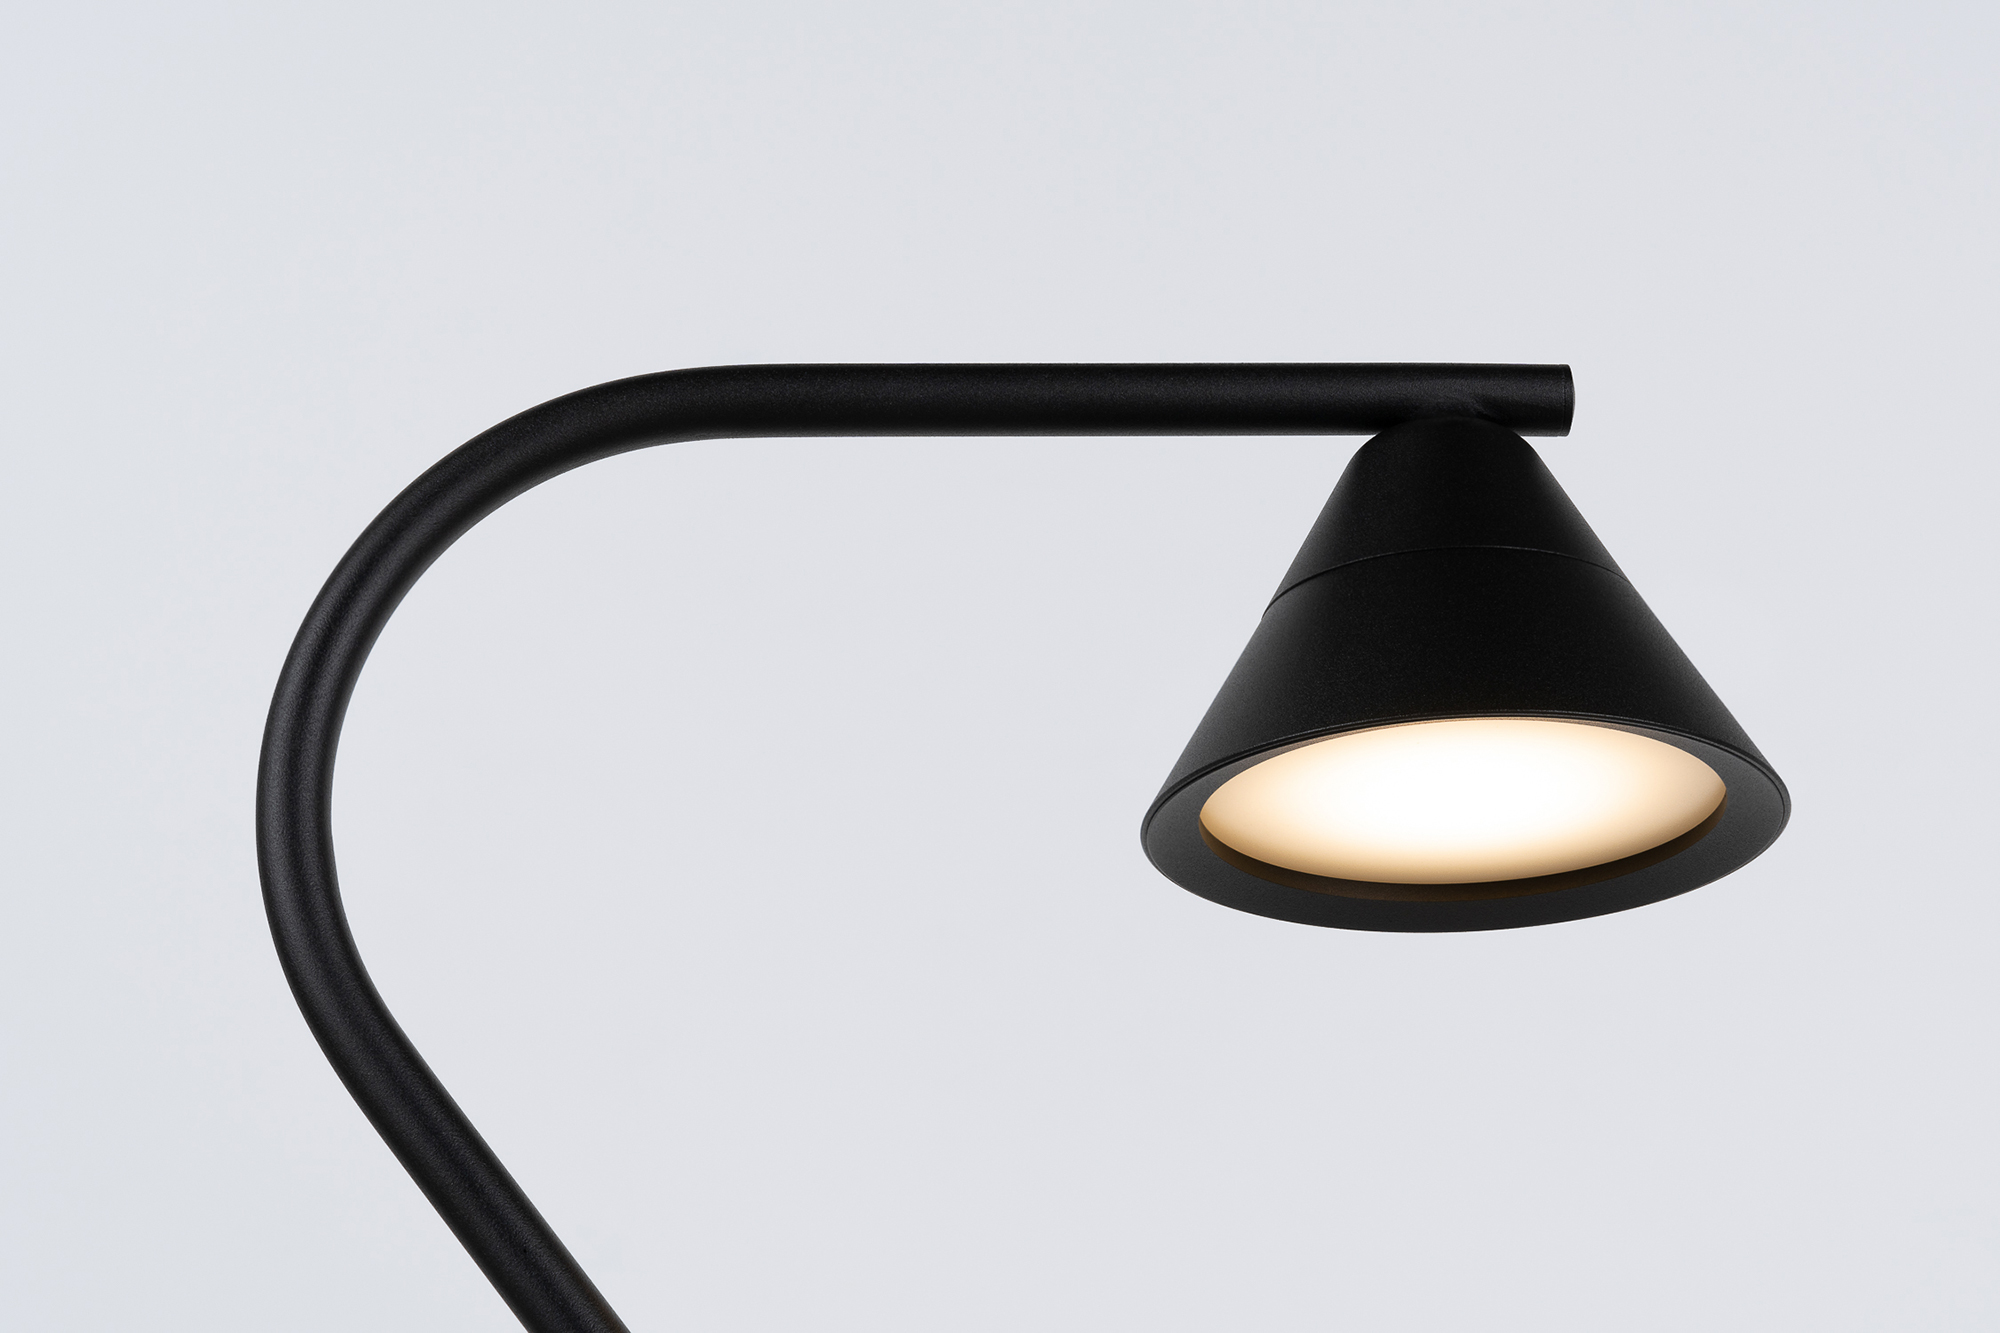 BIRD Lamp by SWNA for Liberal Office - Gessato